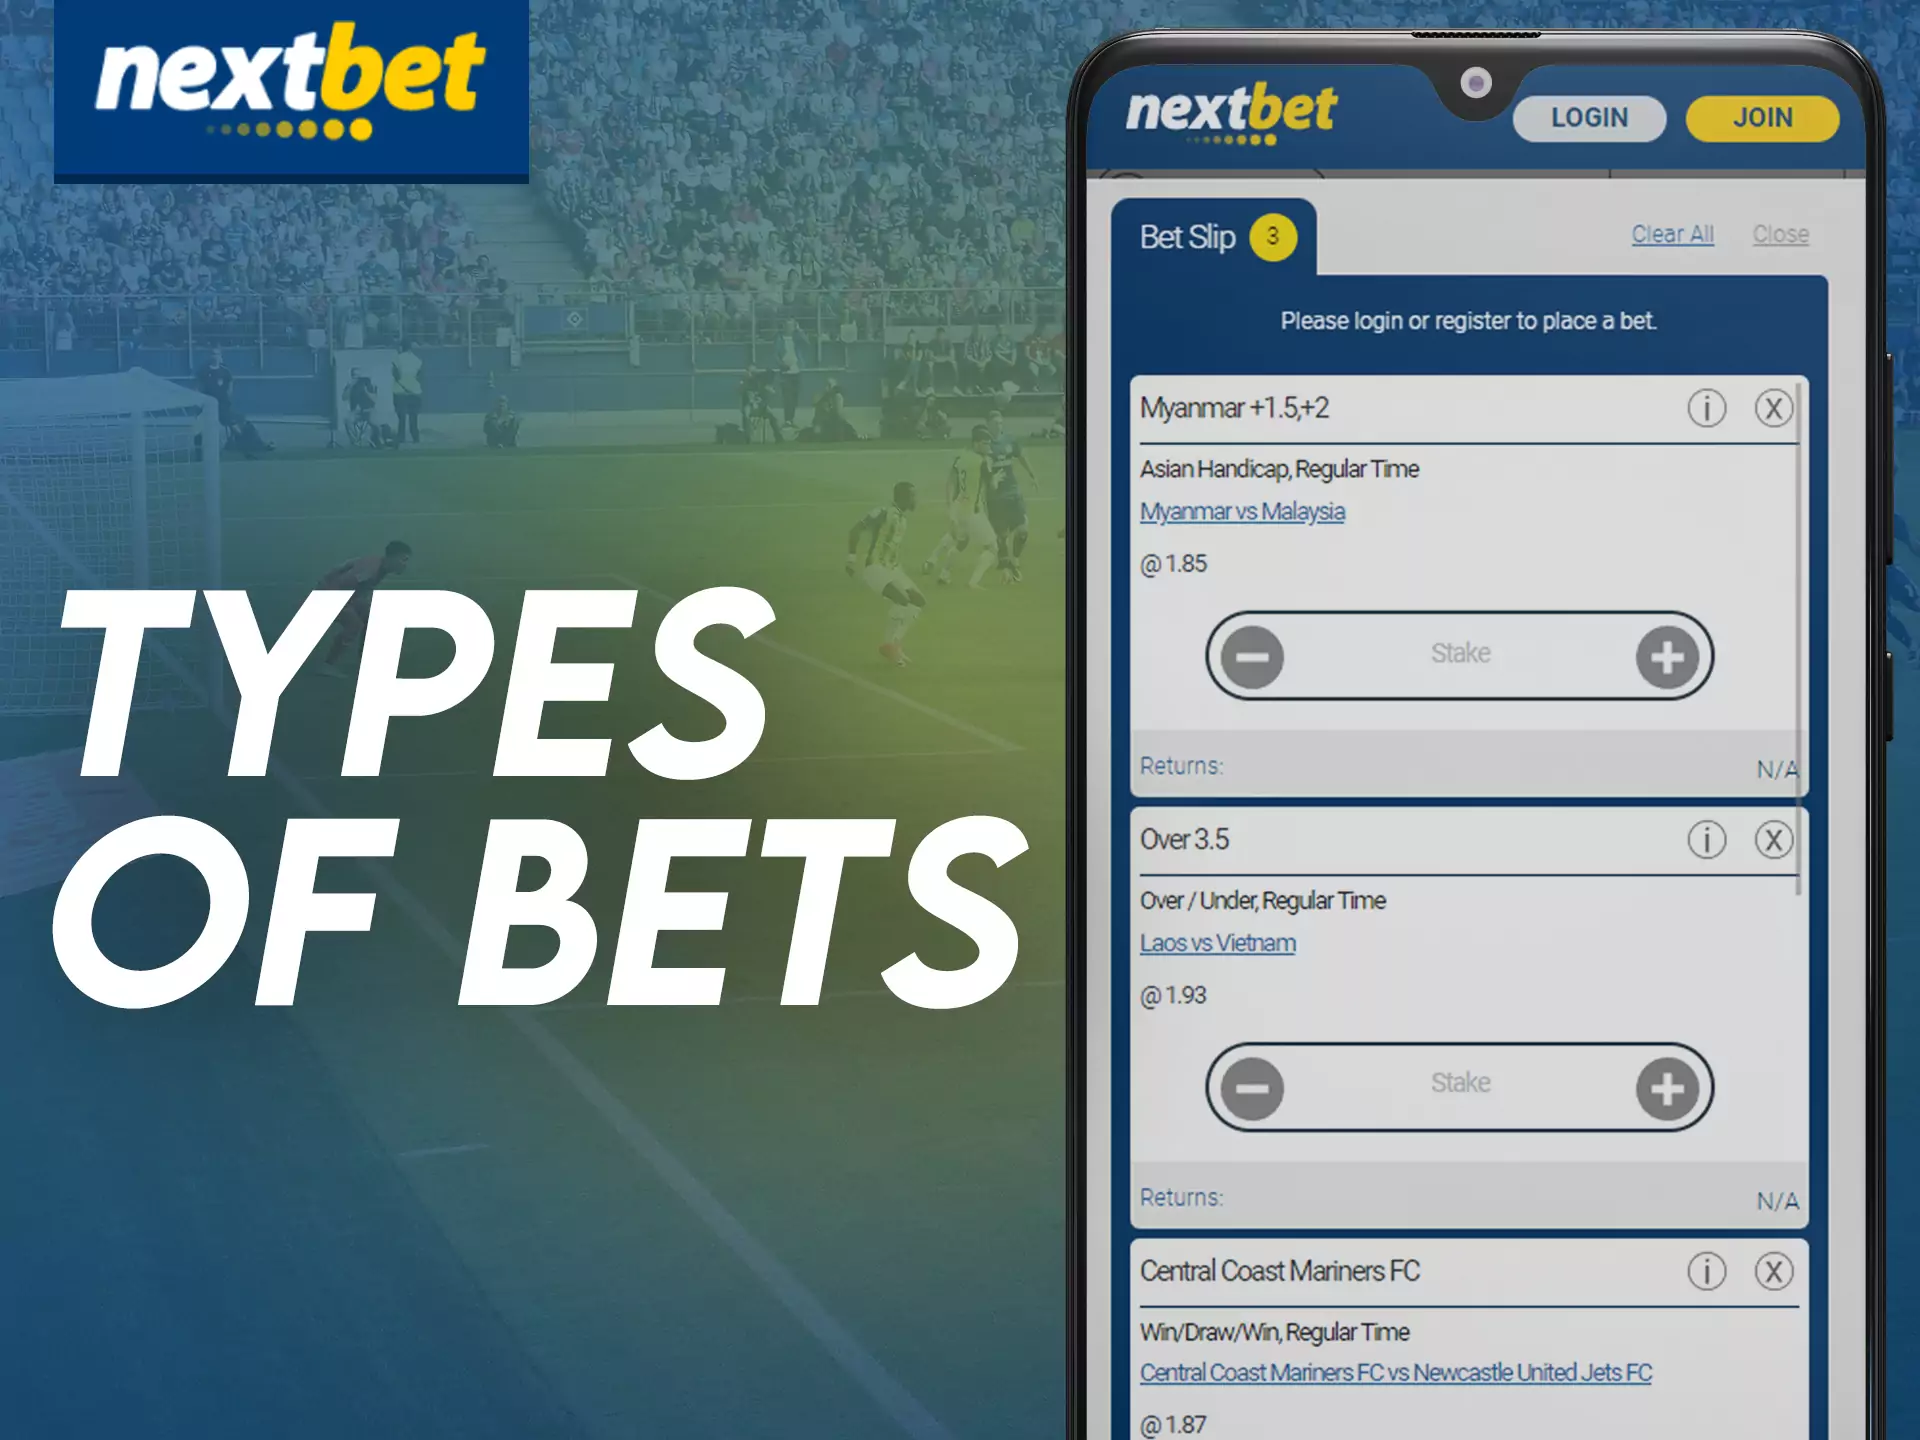 Try different types of bets on various sports events on Nextbet app.